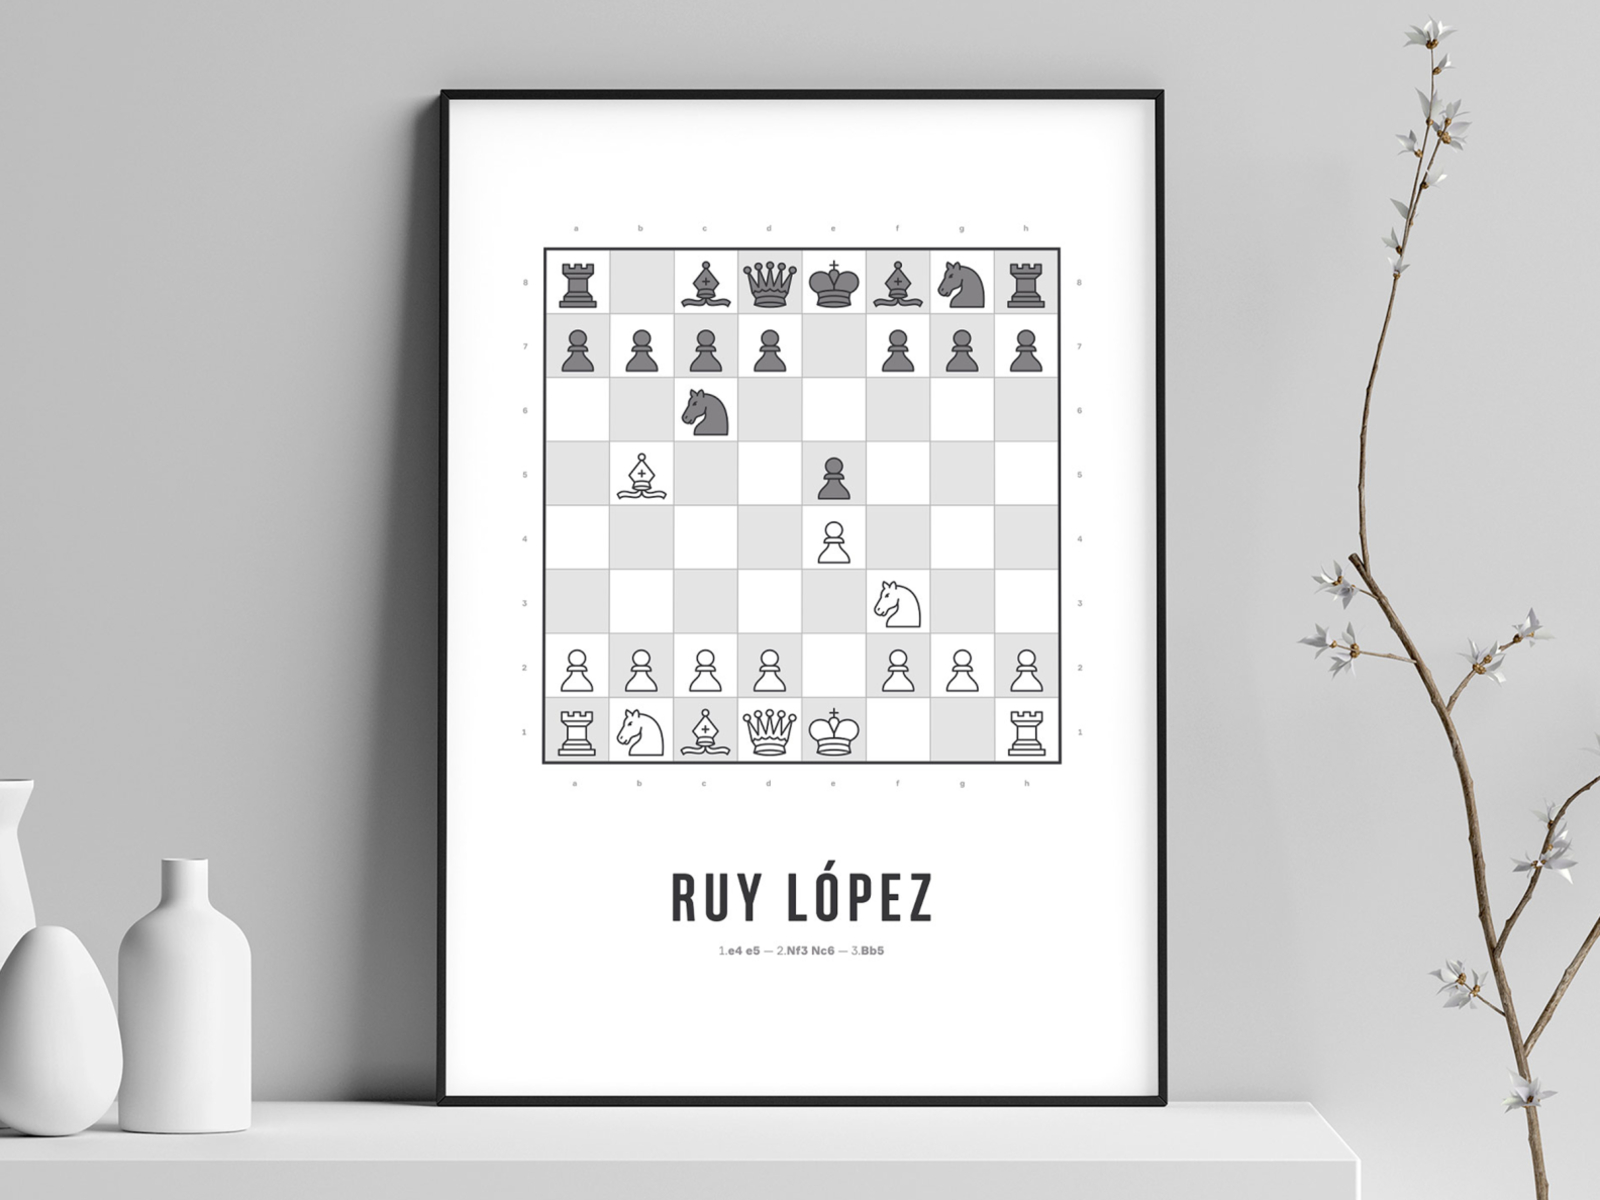 Ruy Lopez Free Expansion for Black? : r/chess